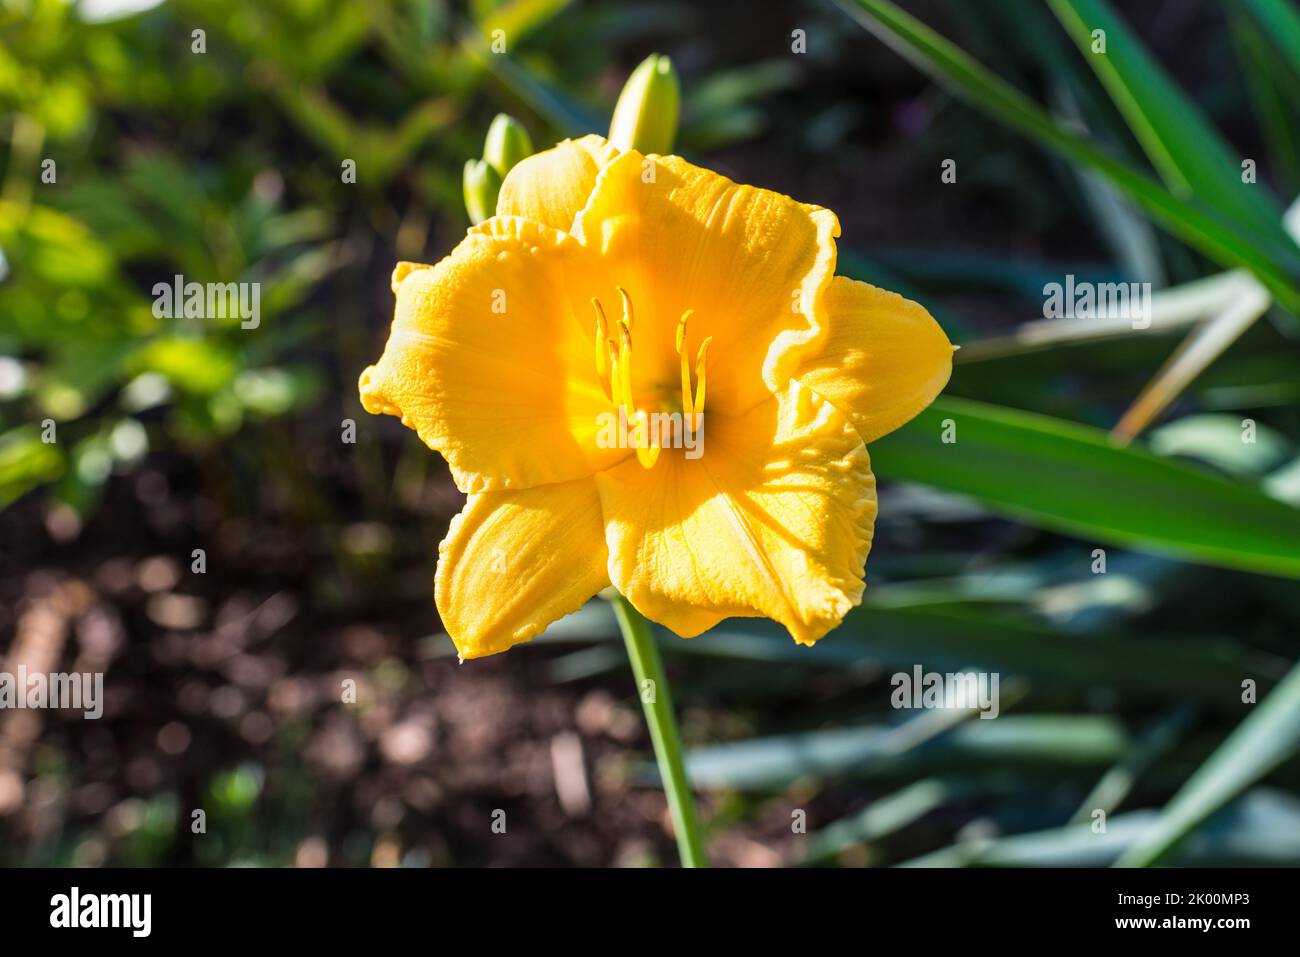 A yellow daylily flower. The daylily is a flowering plant in the genus Hemerocallis. Hemerocallis is native to Asia, primarily eastern Asia, including Stock Photo